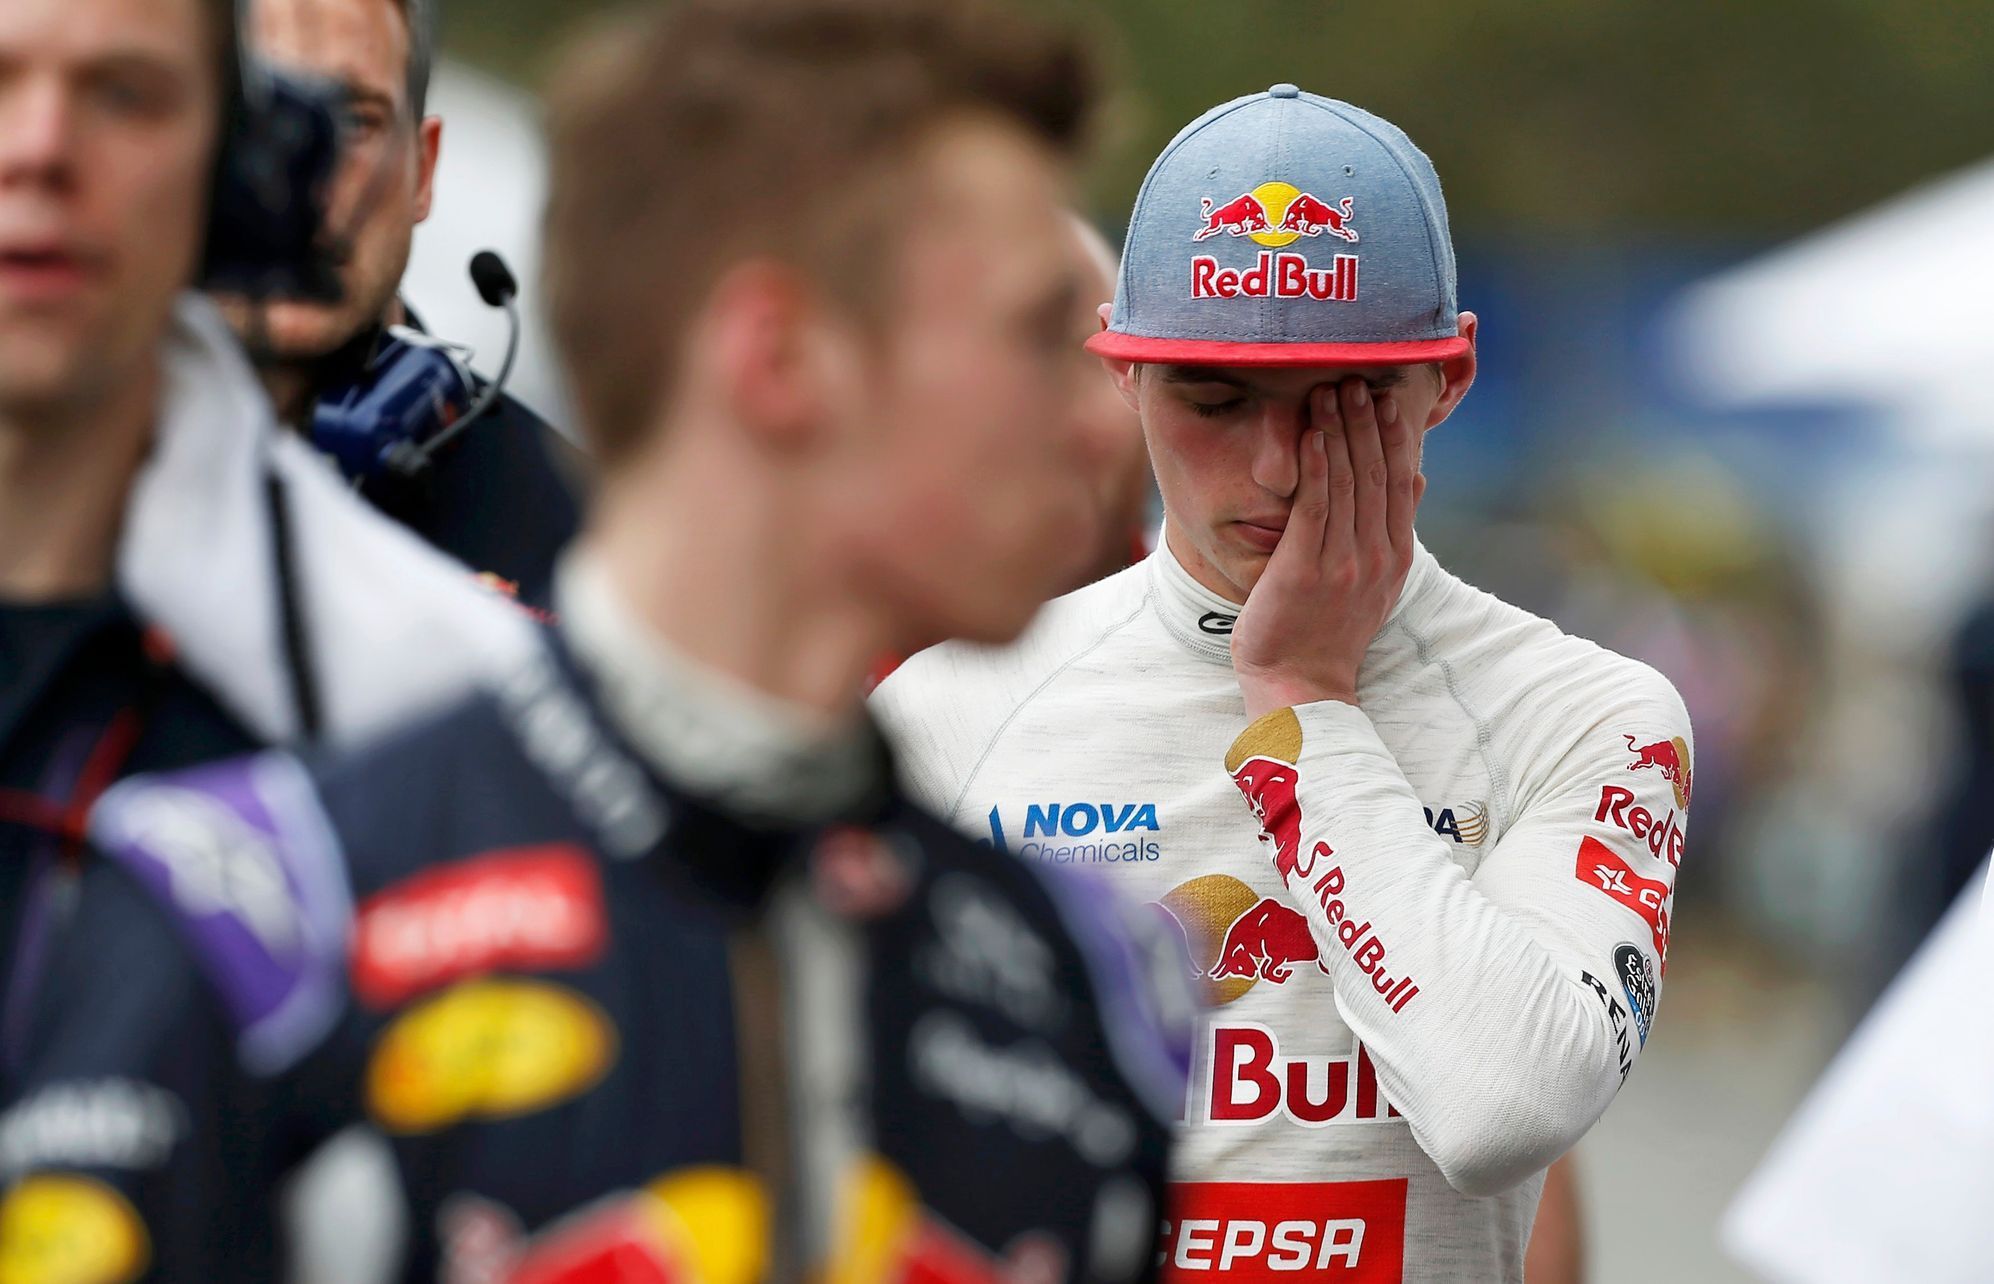 Toro Rosso Formula One driver Max Verstappen of the Netherlands reacts after the qualifying session of the Australian F1 Grand Prix at the Albert Park circuit in Melbourne